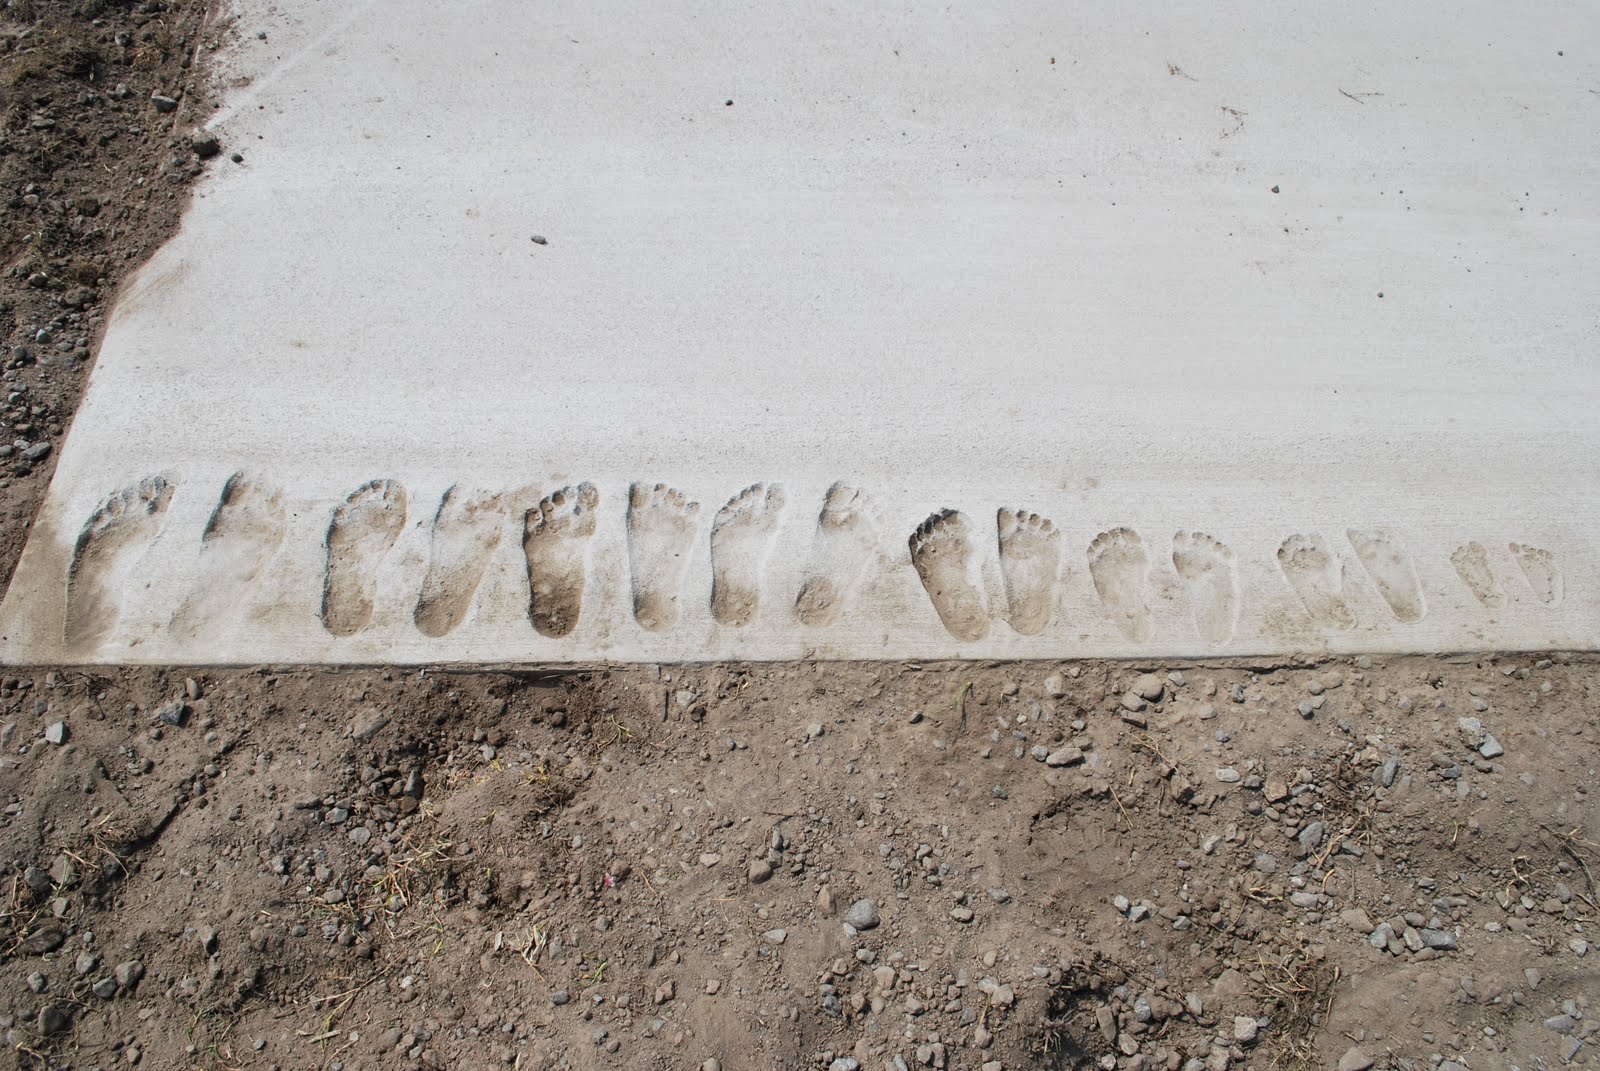 On A Hot Tin Roof: cement footprints & a milestone